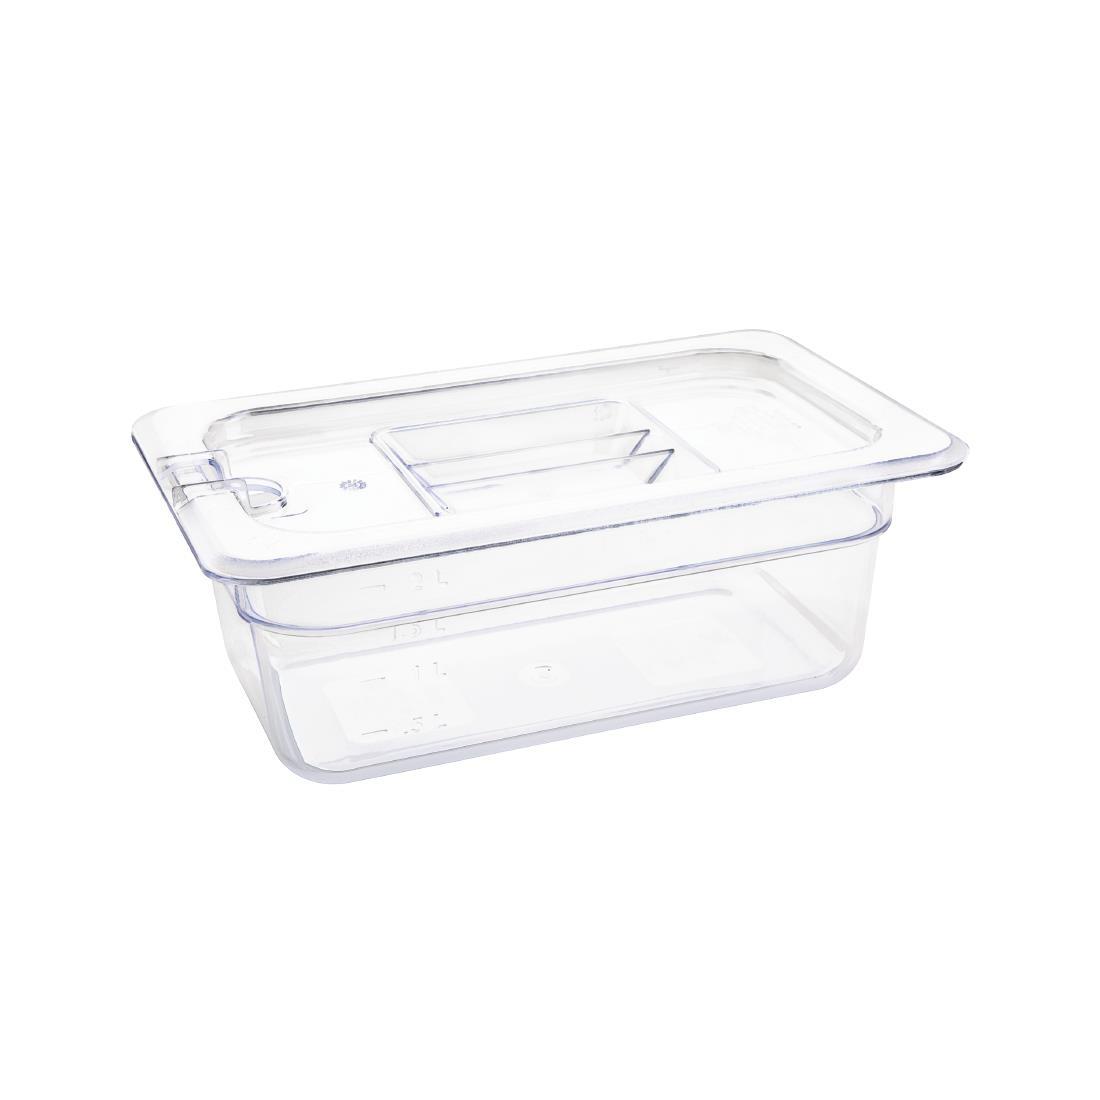 Vogue Polycarbonate 1/4 Gastronorm Container 100mm Clear - U237  - 3